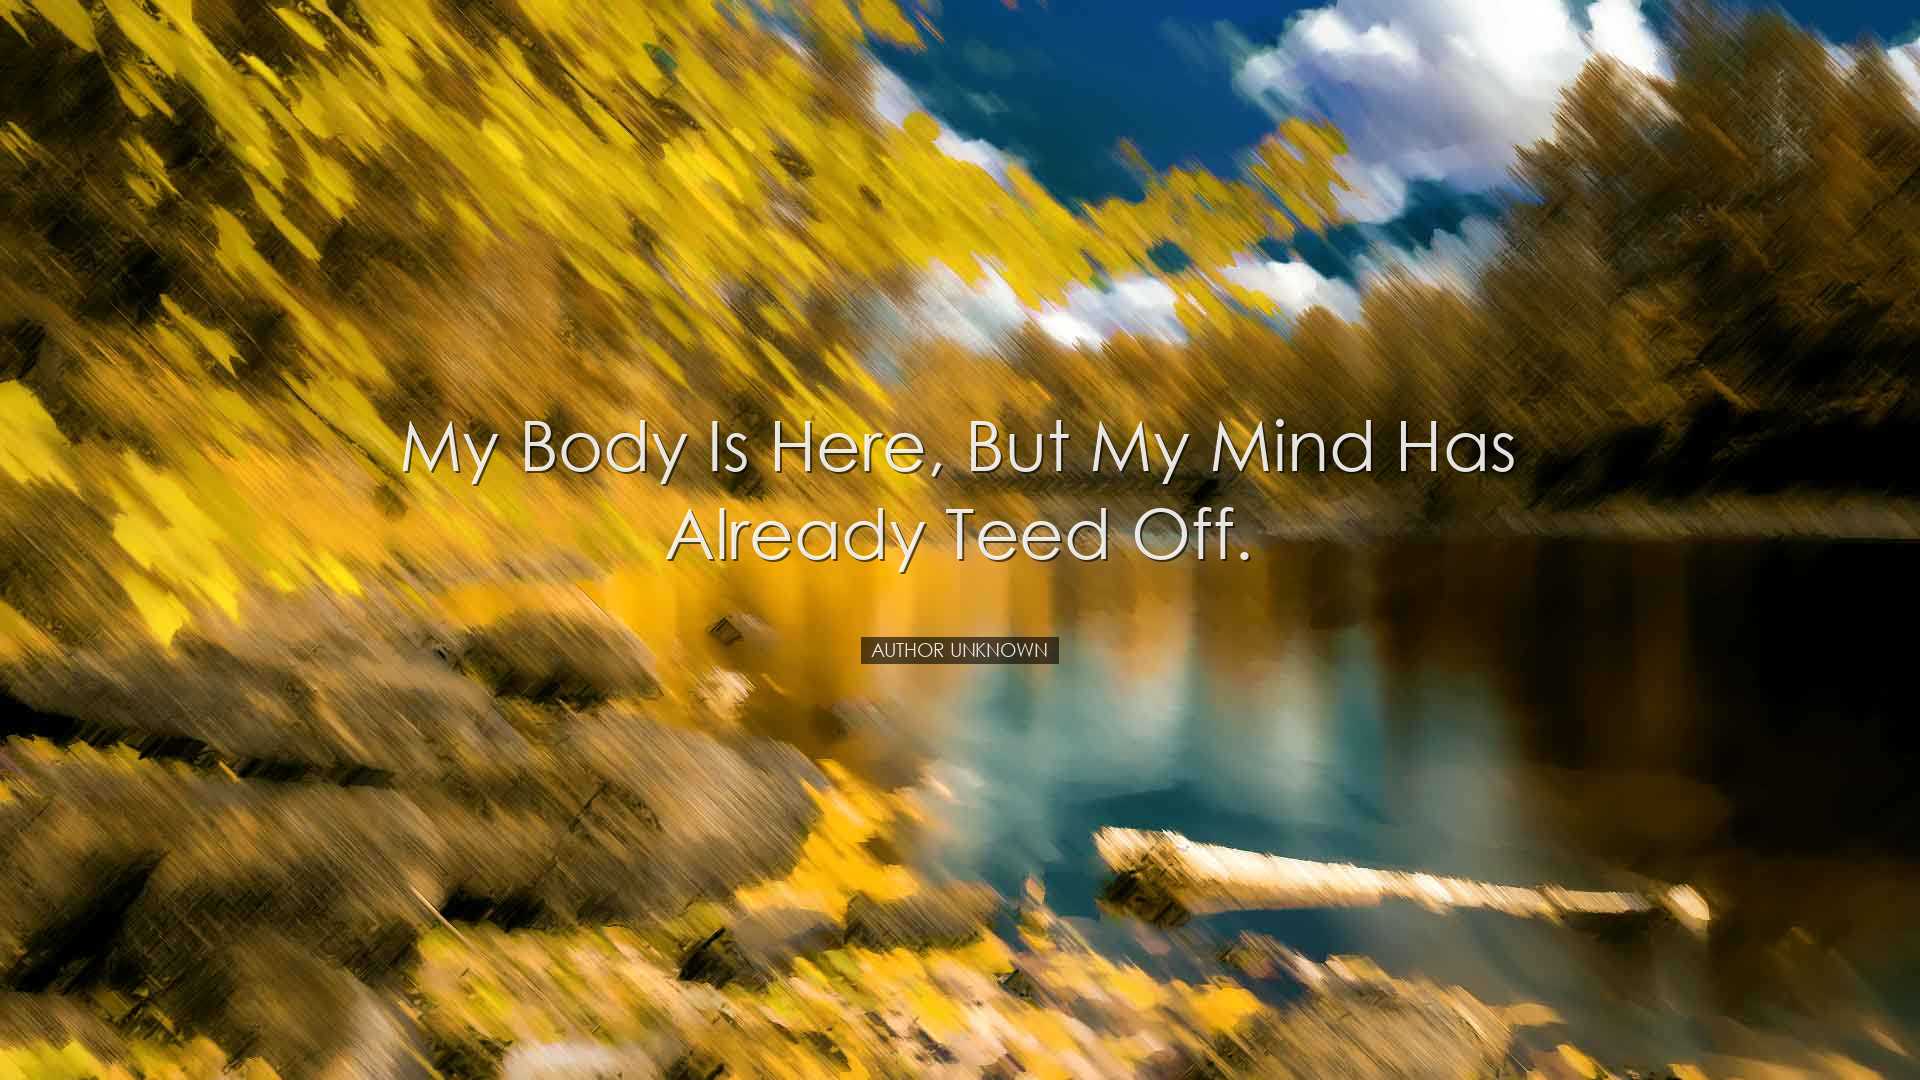 My body is here, but my mind has already teed off. - Author Unknow